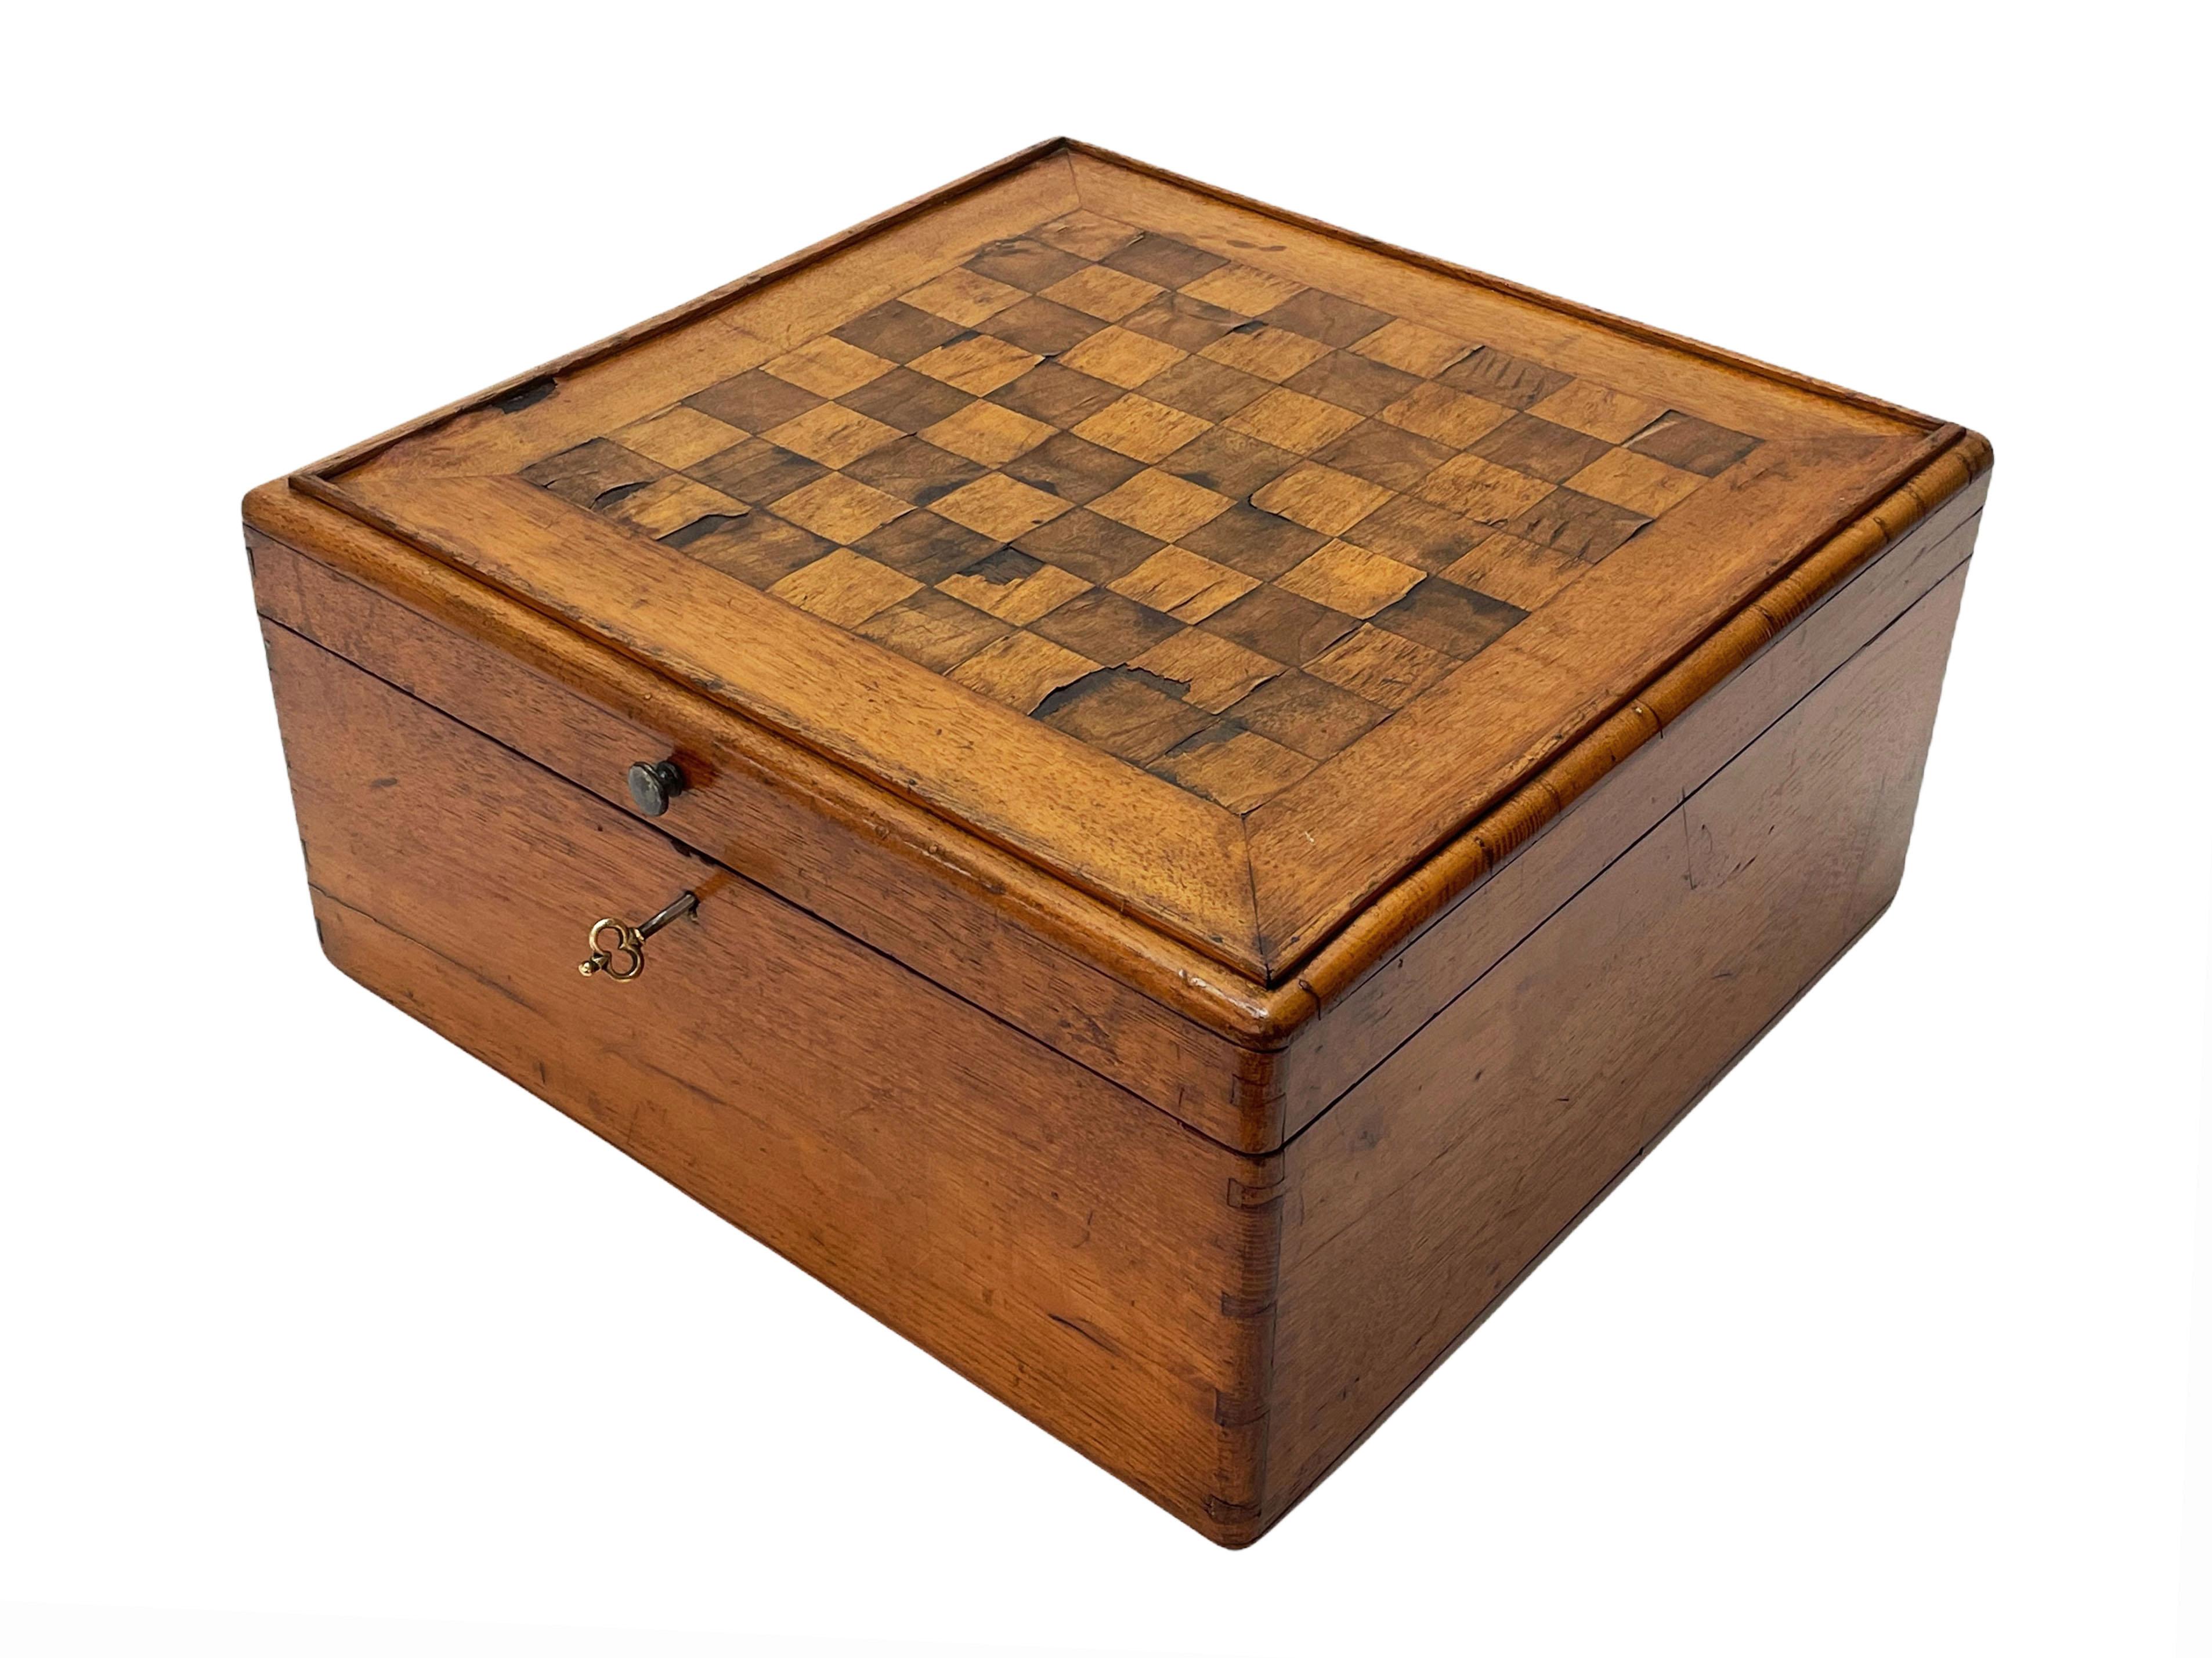 Early 20th Century Large Wooden Inlaid Squared Italian Chessboard Box, 1900s